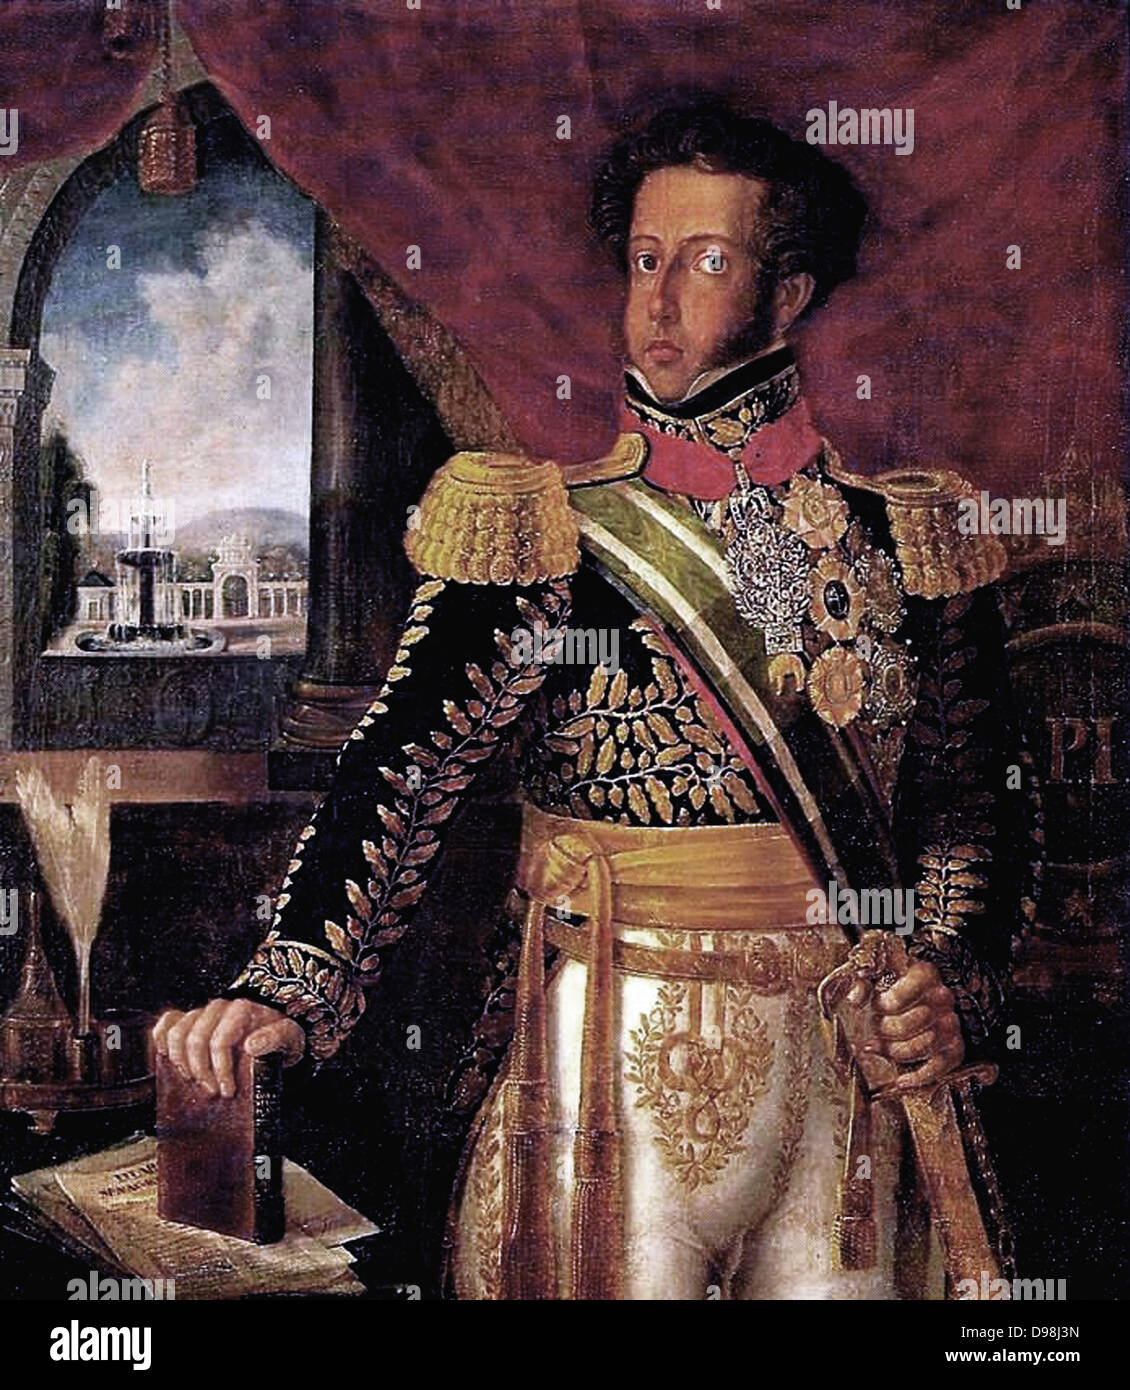 Pedro I of Brazil (1798 – 1834), founder and first ruler of the Empire of Brazil and also King of Portugal as Pedro IV, having reigned for eight years in Brazil and two months in Portugal respectively. by Manoel de Araújo Porto-alegre (1806–1879) Stock Photo